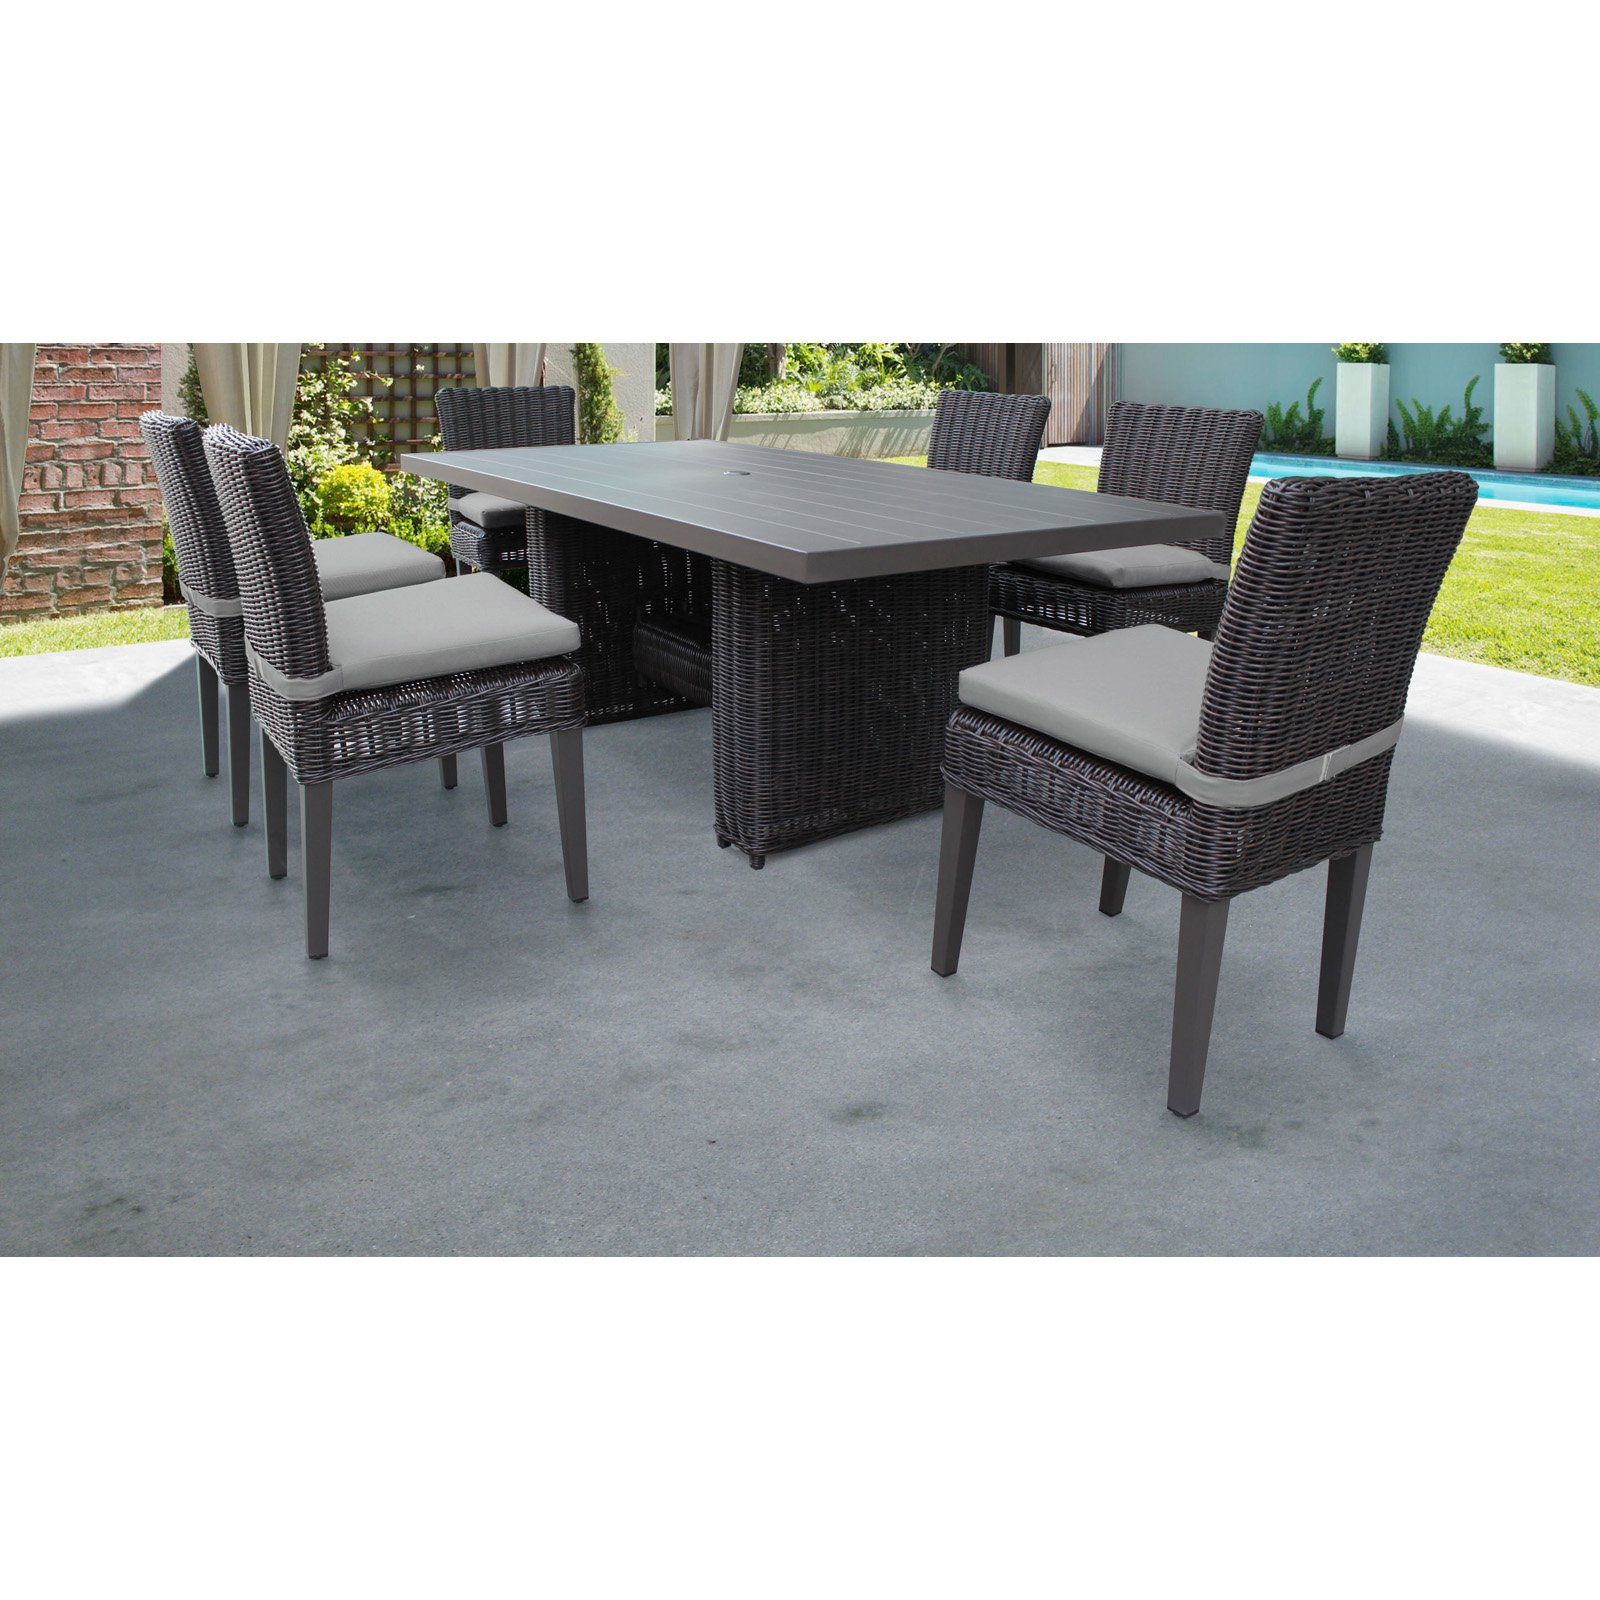 Outdoor Tk Classics Venice Wicker 7 Piece Patio Dining Set for proportions 1600 X 1600